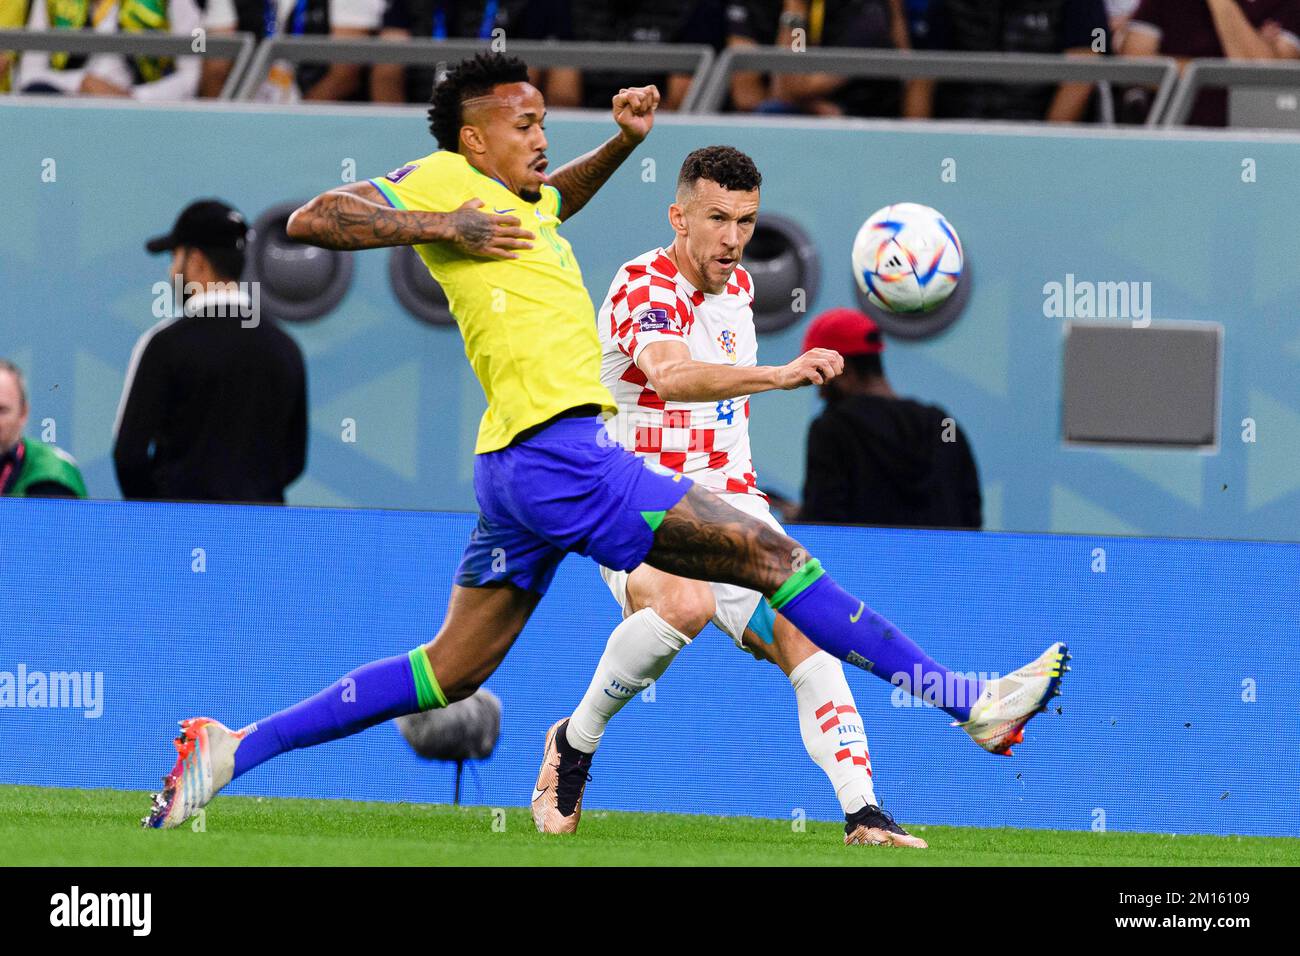 Doha, Qatar. 09th Dec, 2022. Education City Stadium Eder Militao of Brazil and Mario Pasalic of Croatia during the match between Croatia and Brazil, valid for the quarterfinals of the World Cup, held at the Education City Stadium in Doha, Qatar. (Marcio Machado/SPP) Credit: SPP Sport Press Photo. /Alamy Live News Stock Photo